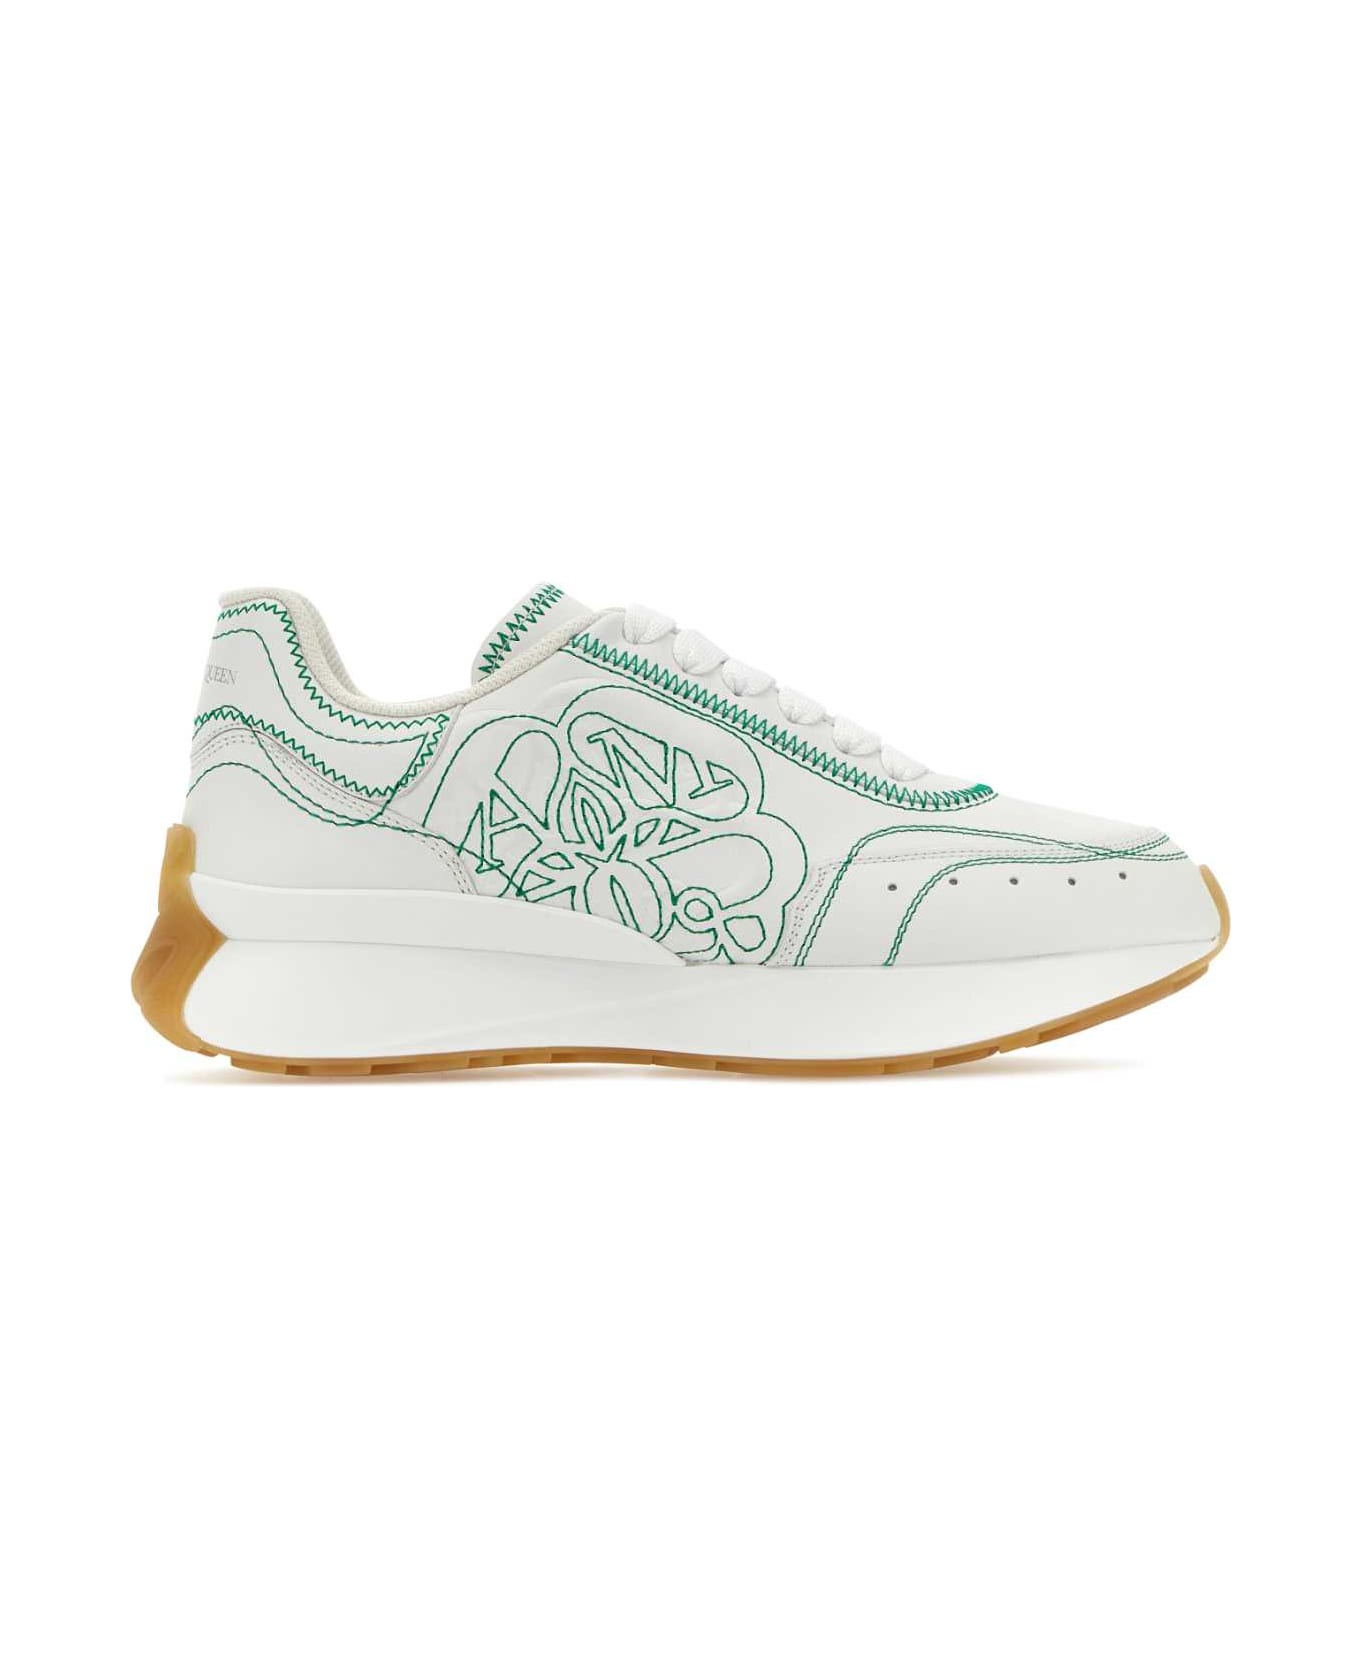 Alexander McQueen White Leather Sneakers - WHISILBRGREAM